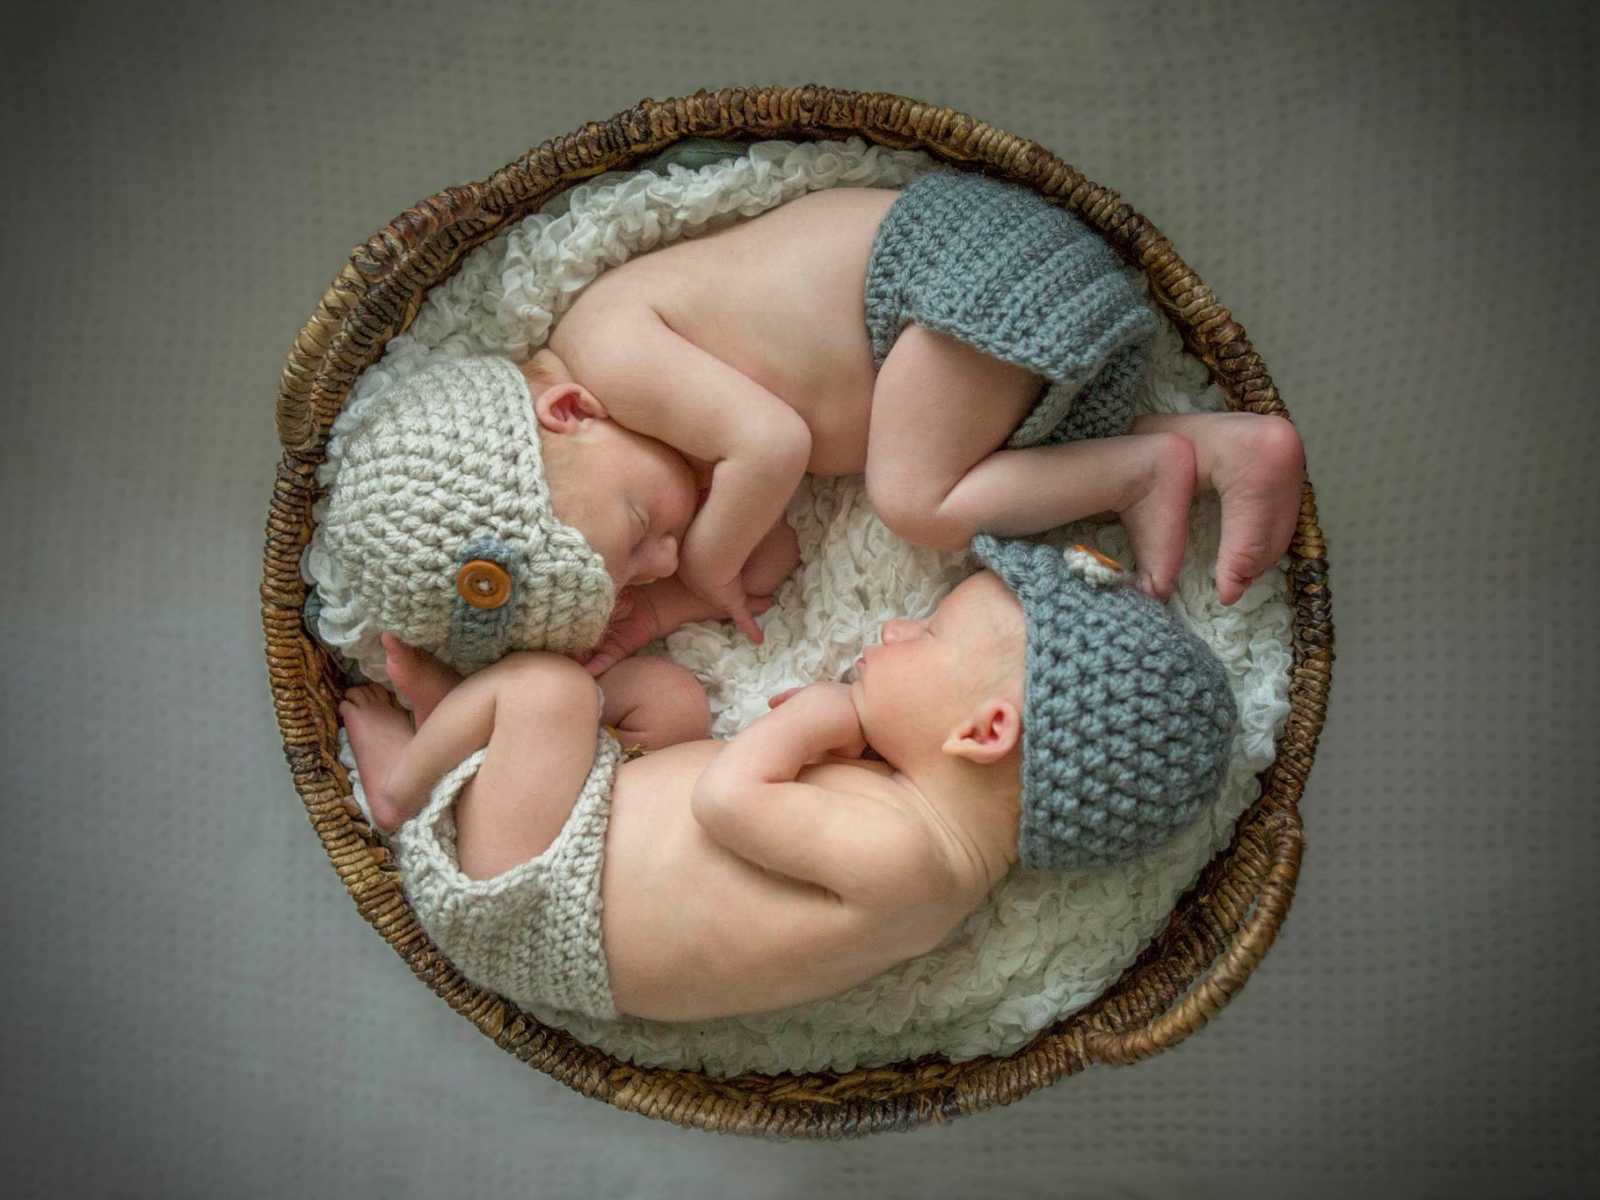 newborn twins curled up in basket with knit diaper and hat on